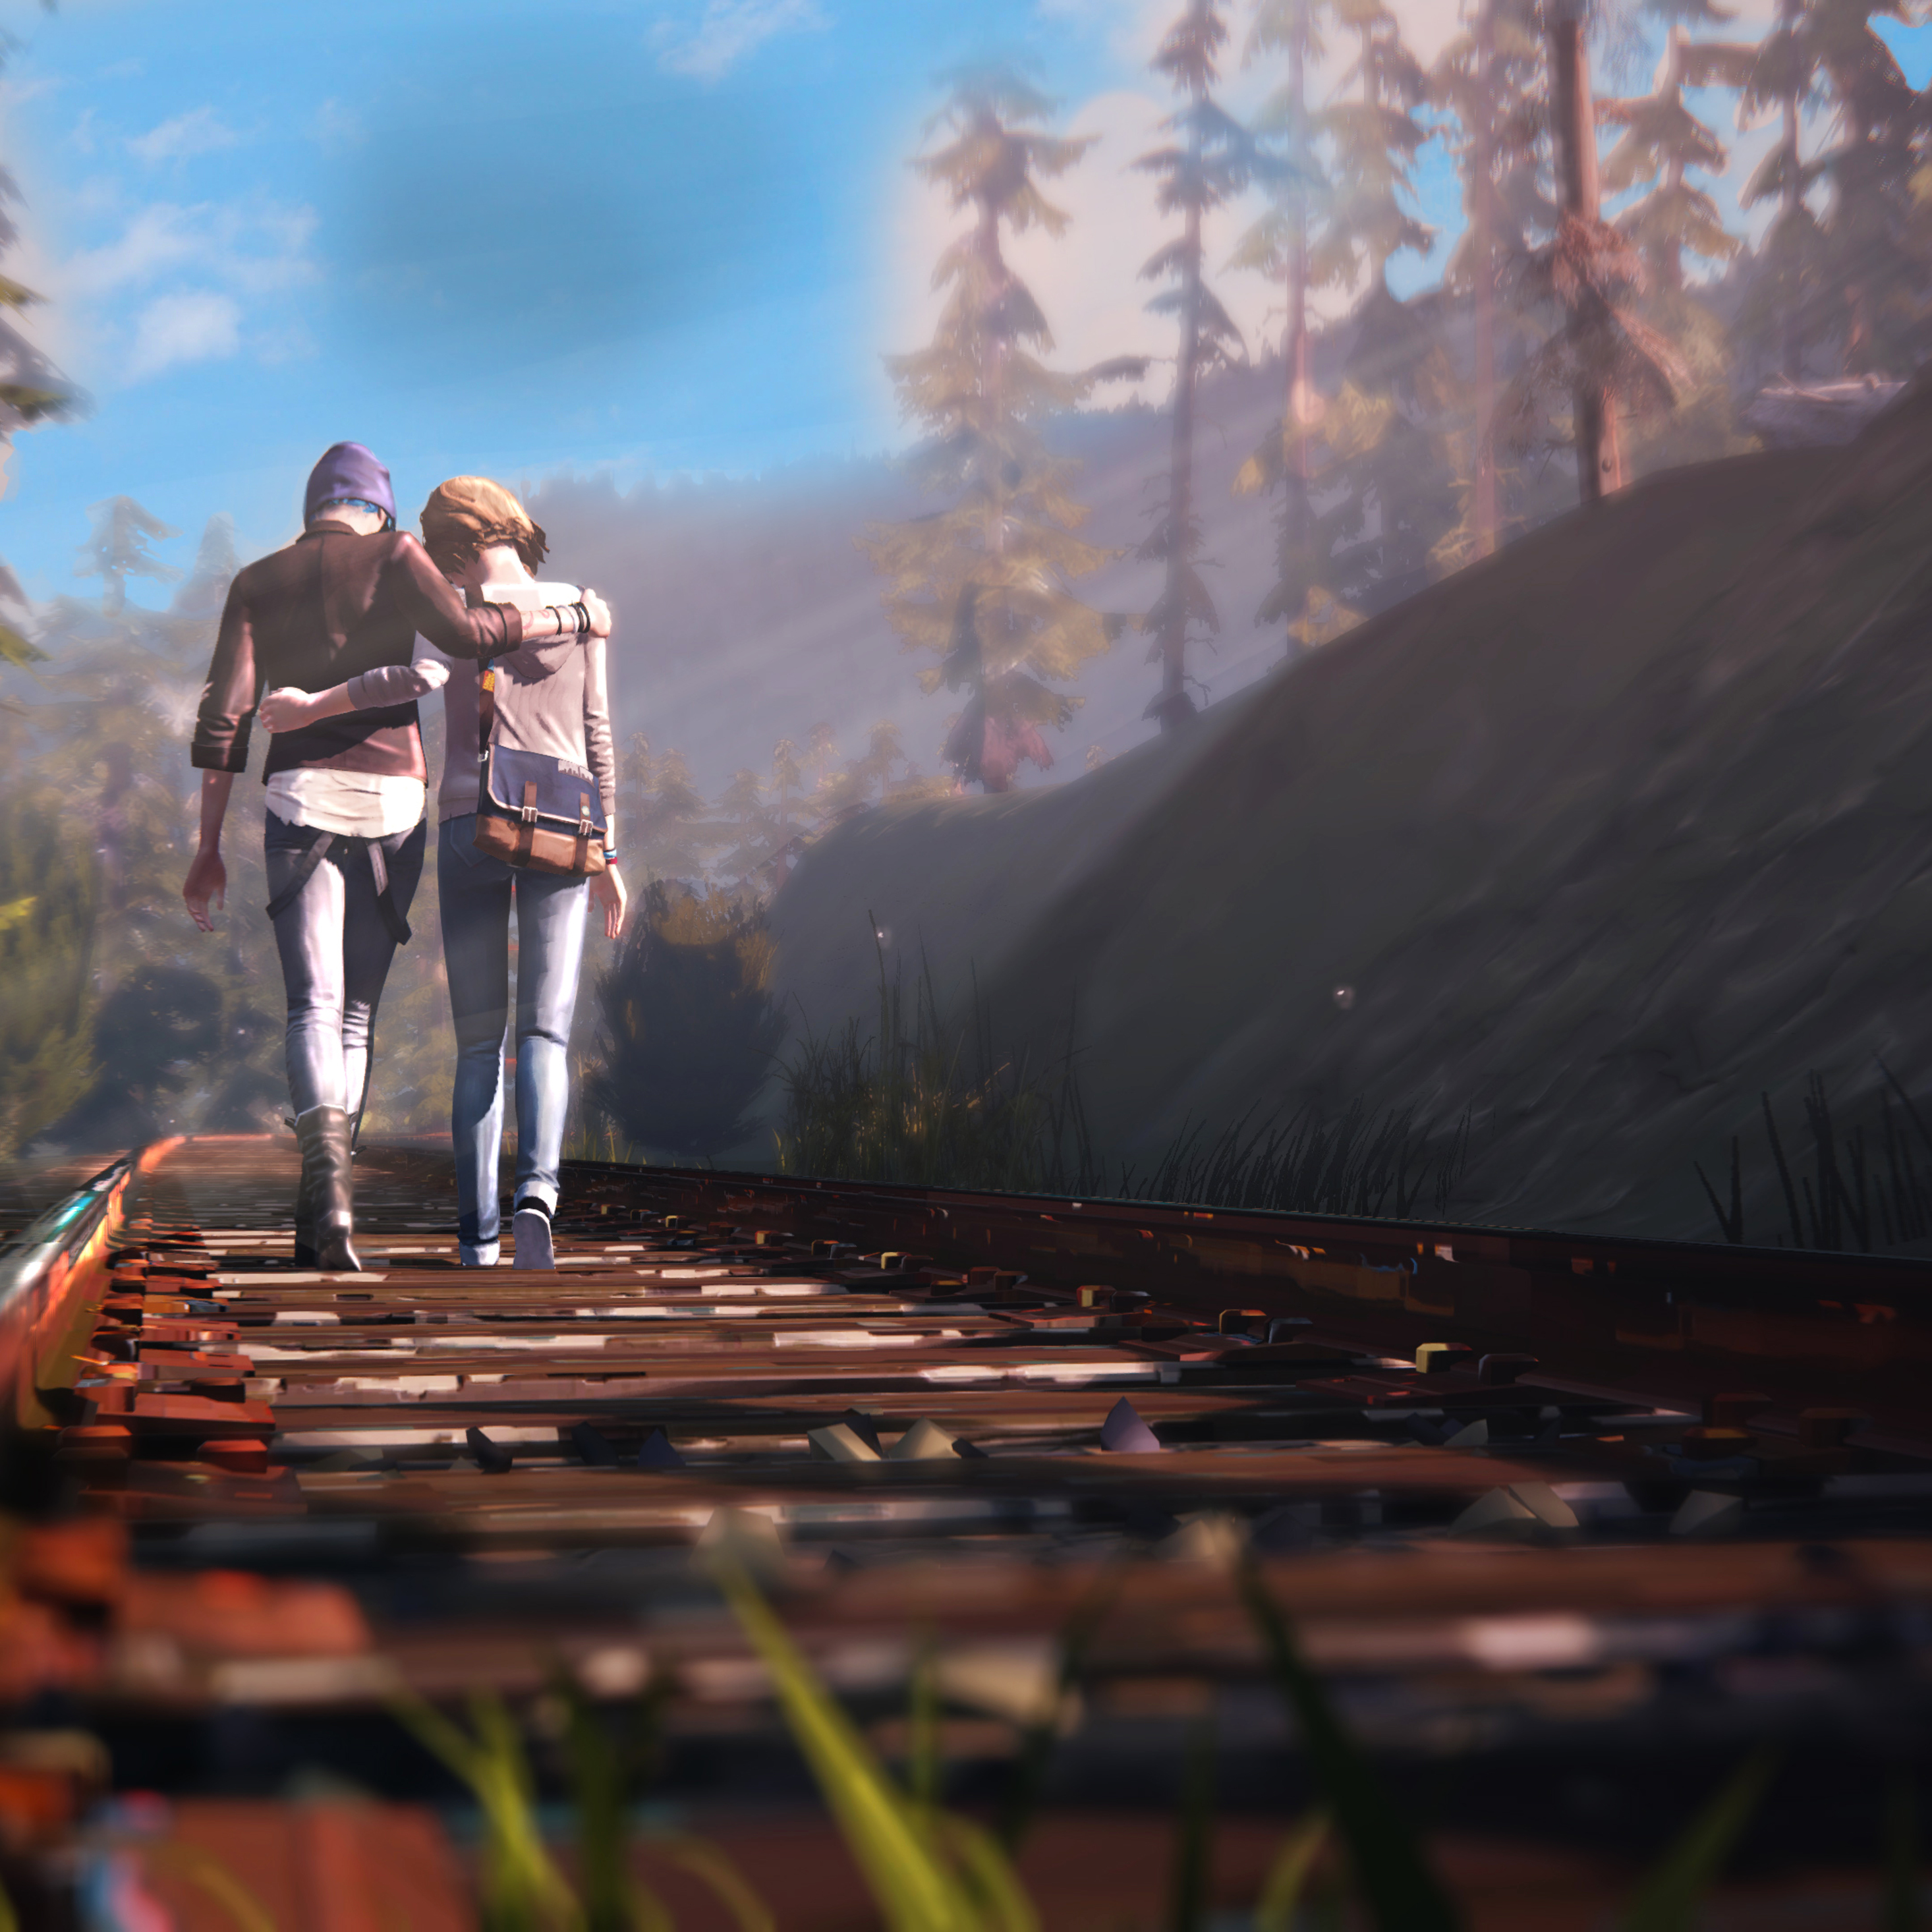 Your story adventure. Life is Strange 2 Forest Sunset.